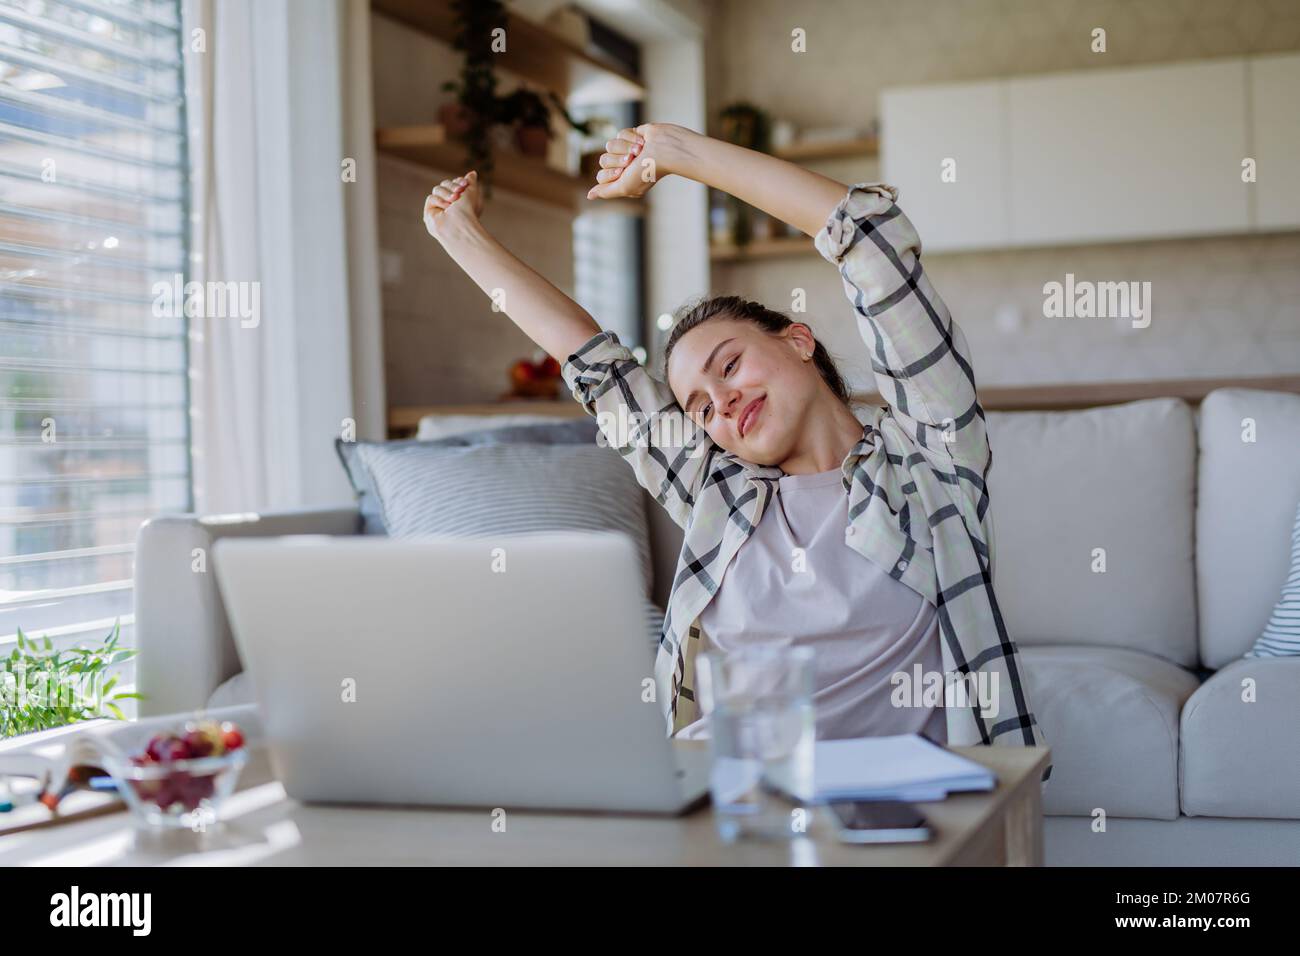 Young woman stretching during homeoffice in her apartment. Stock Photo